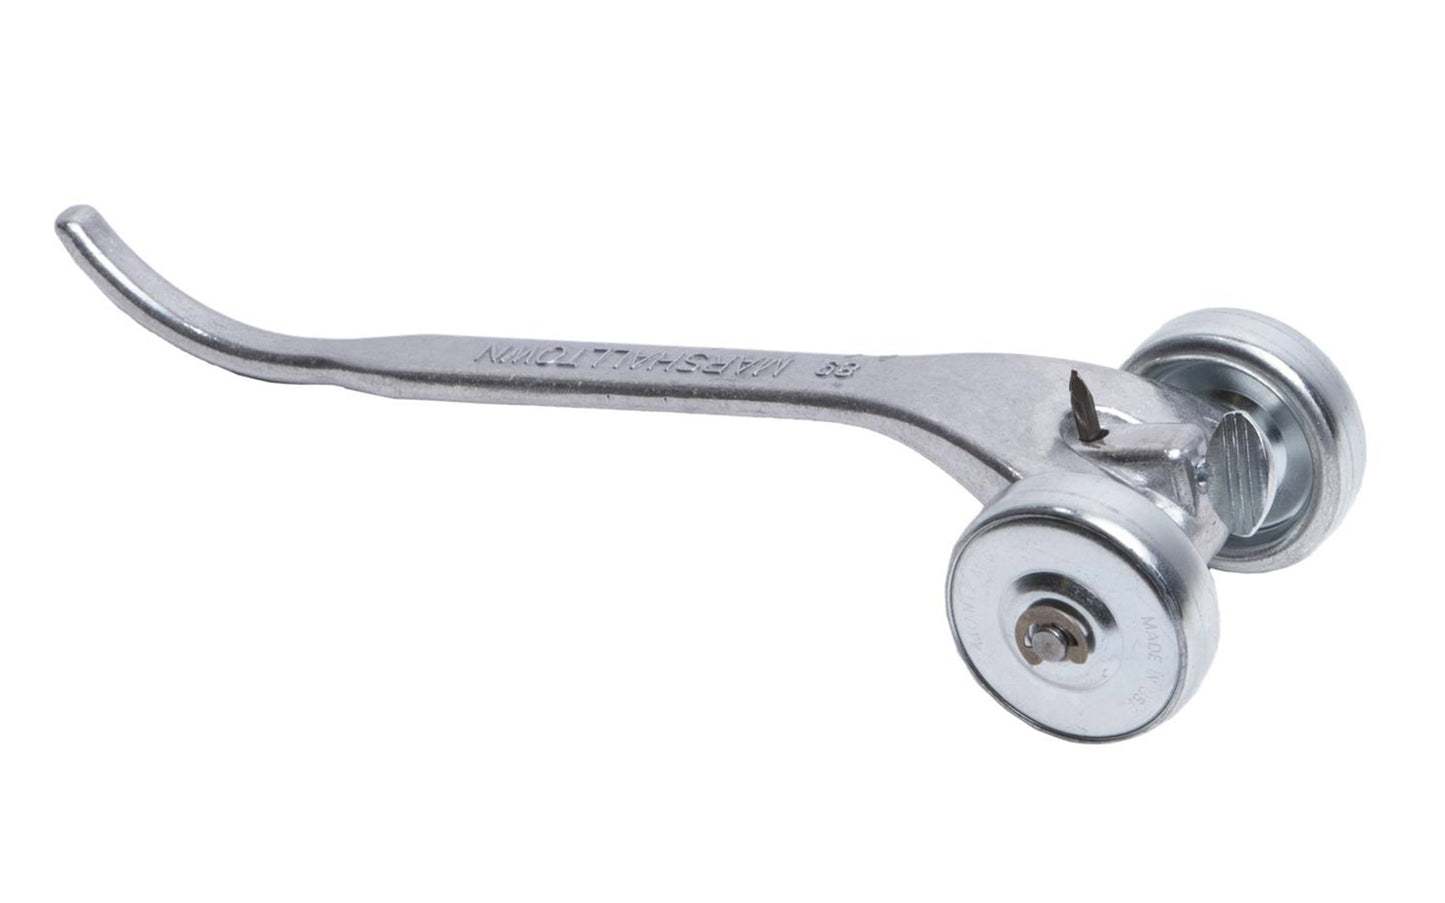 This Marshalltown Joint Raker easily removes excess mortar from between bricks. Use the aluminum handle to push the 1-3/4" skate wheels and a hardened nail that adjusts to clean out joints. Model 89 ~ 035965055024